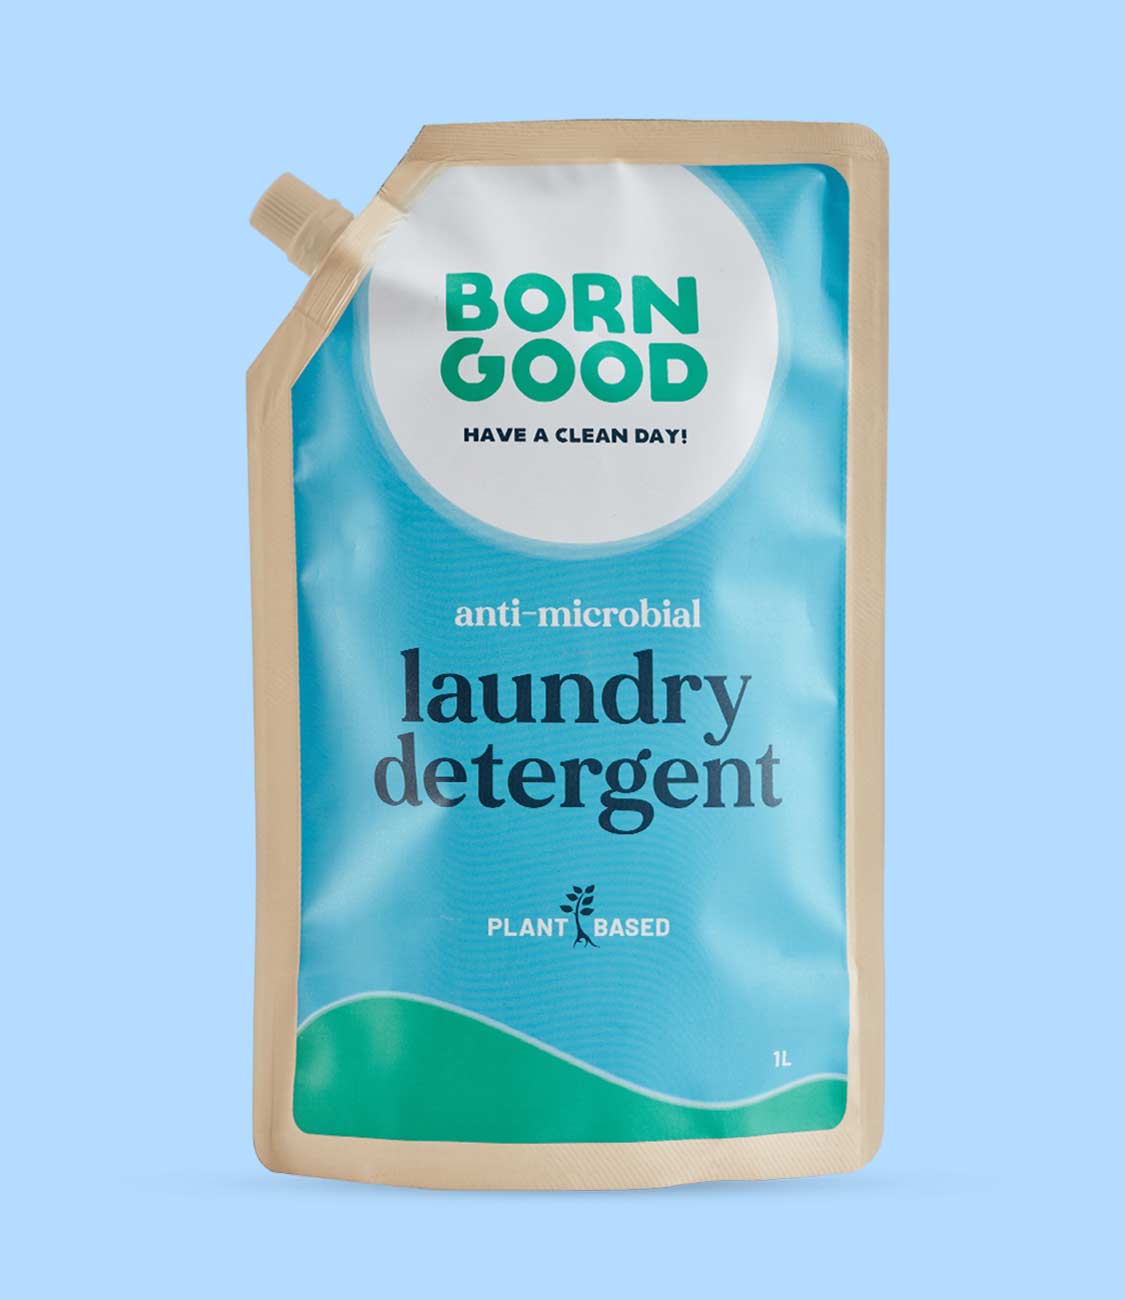 Anti Microbial Liquid Detergent for Activewear